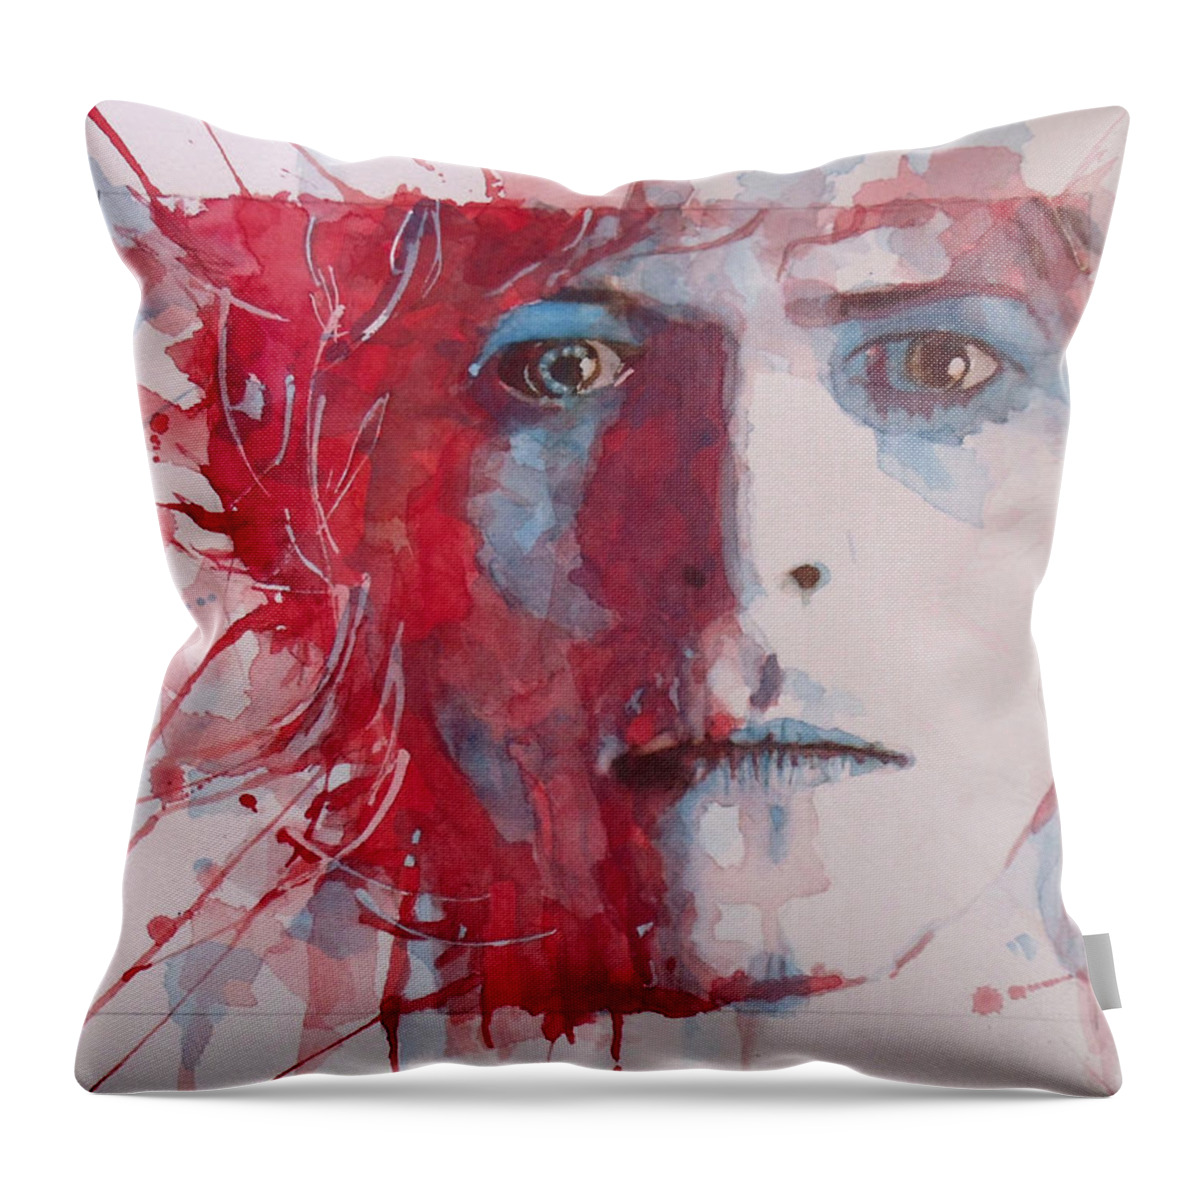 David Bowie Throw Pillow featuring the painting The Prettiest Star by Paul Lovering